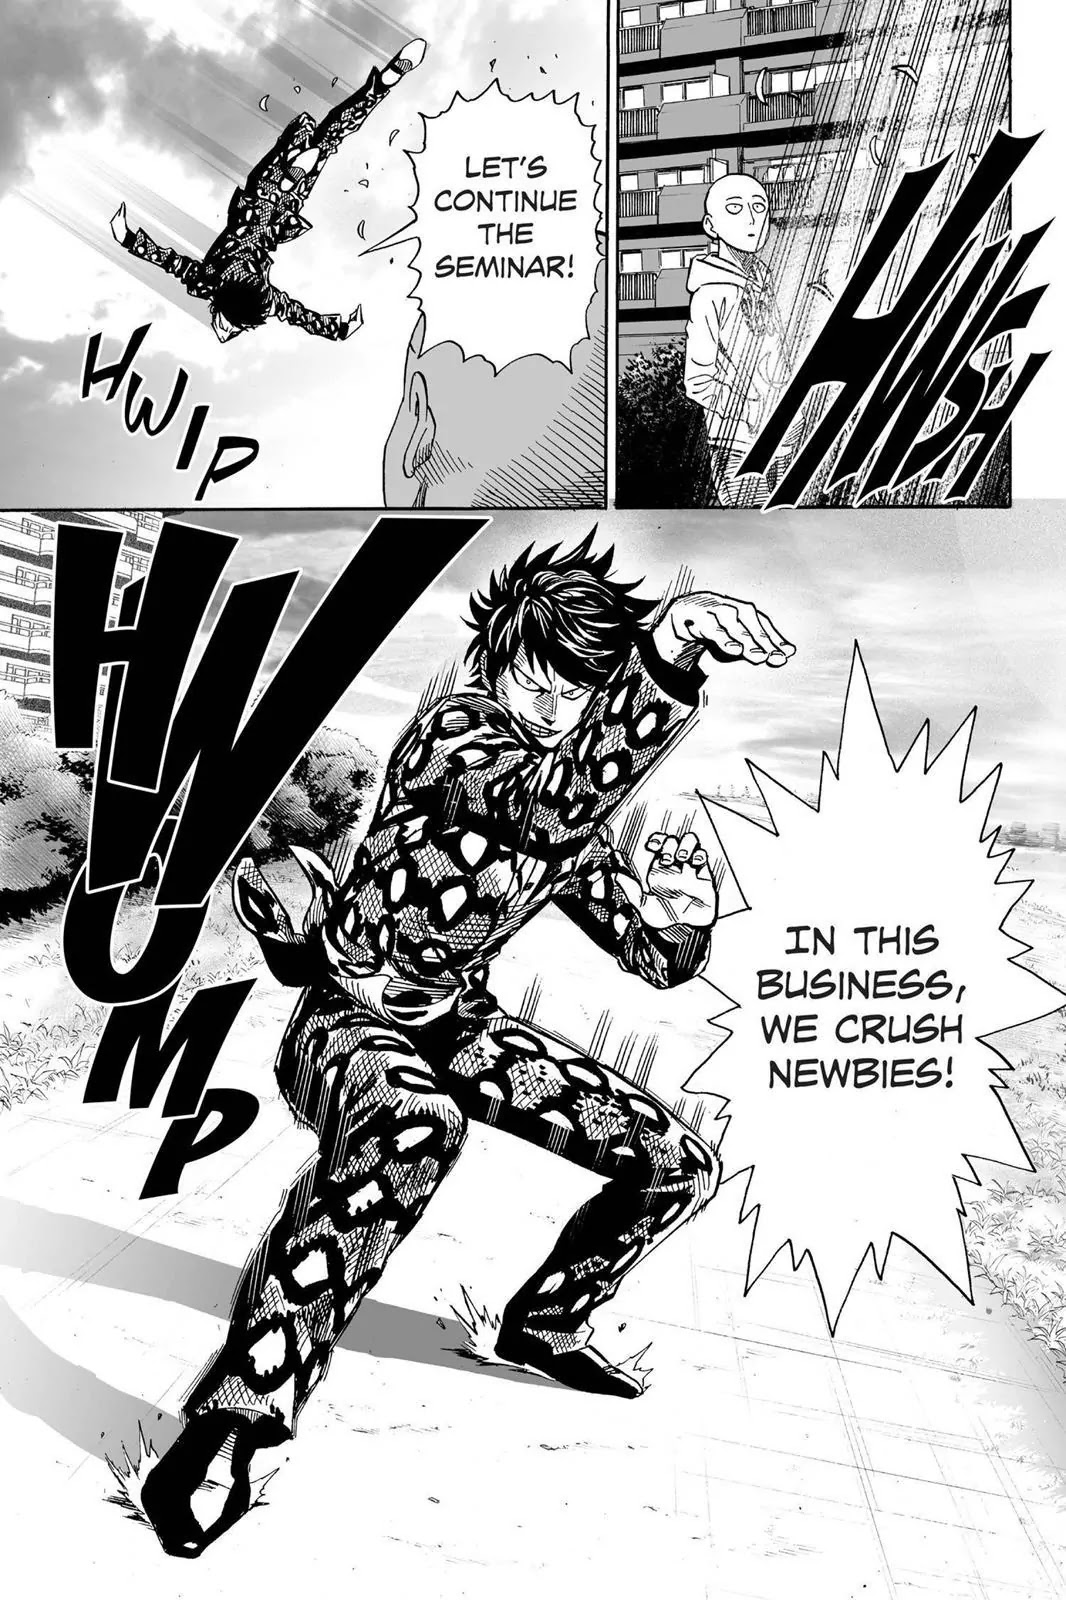 One Punch Man, Chapter 16 I Passed image 28